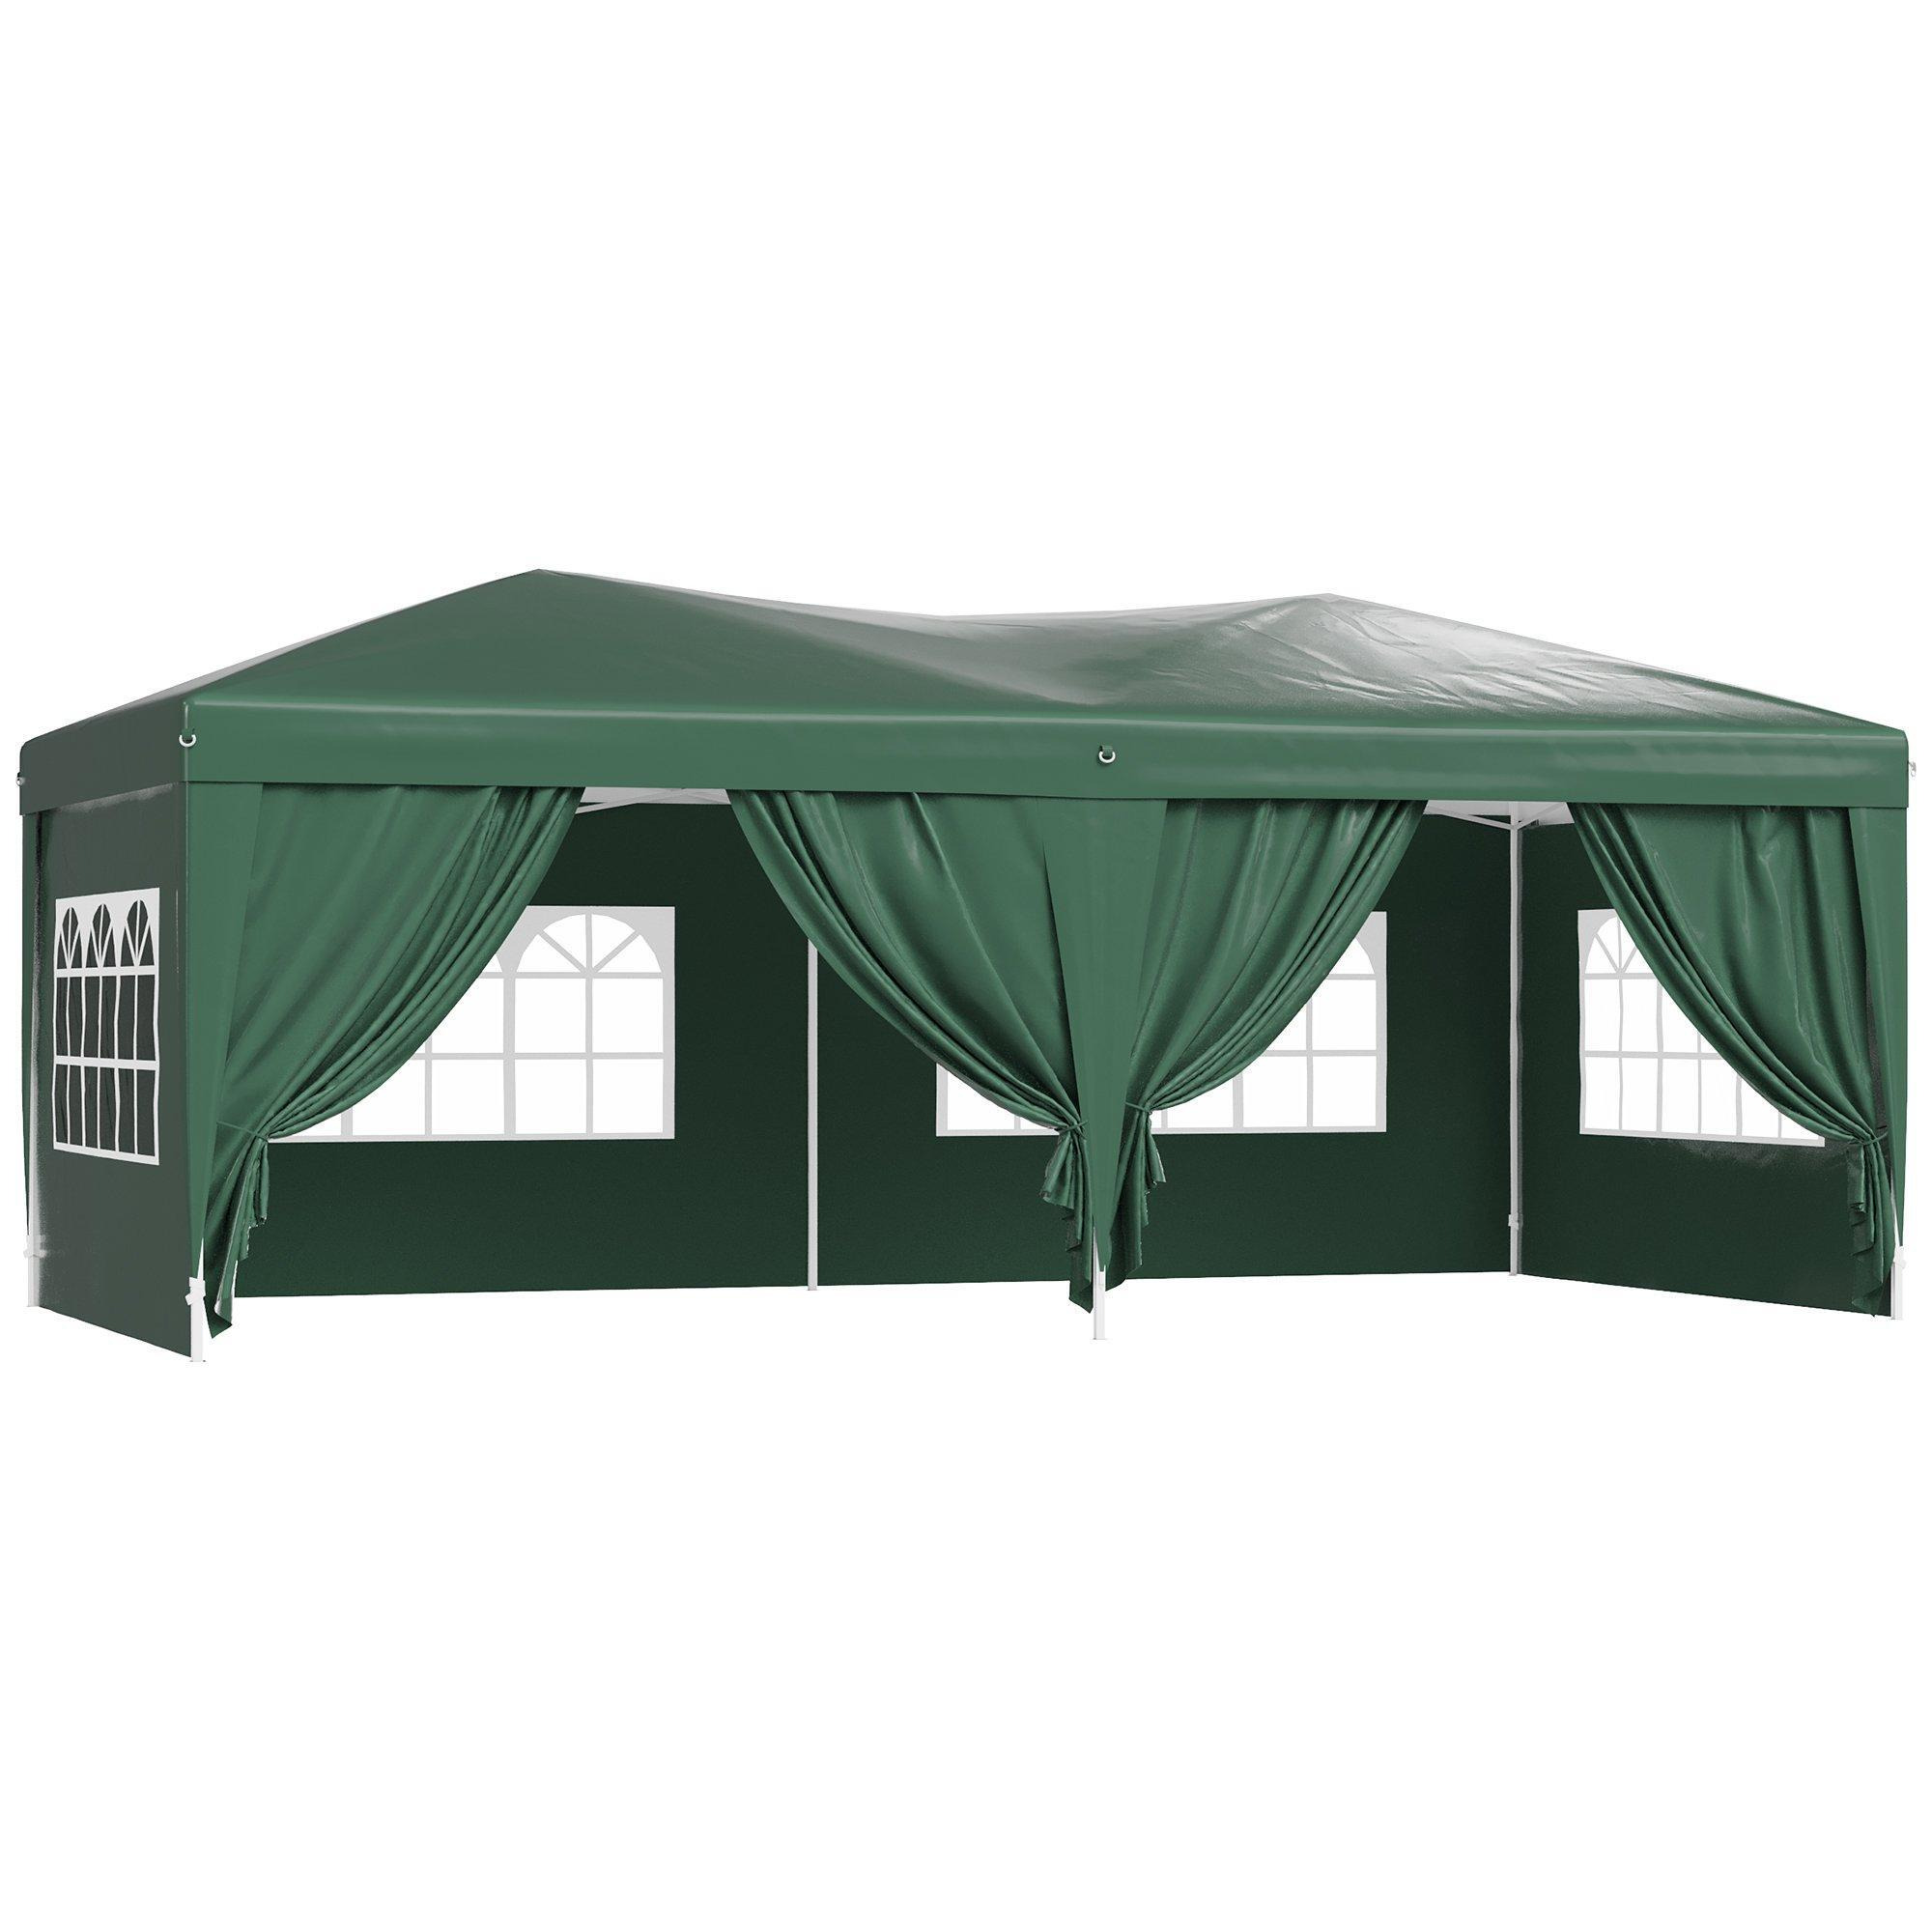 3 x 6m Pop Up Gazebo Height Adjustable Party Tentwith Storage Bag - image 1